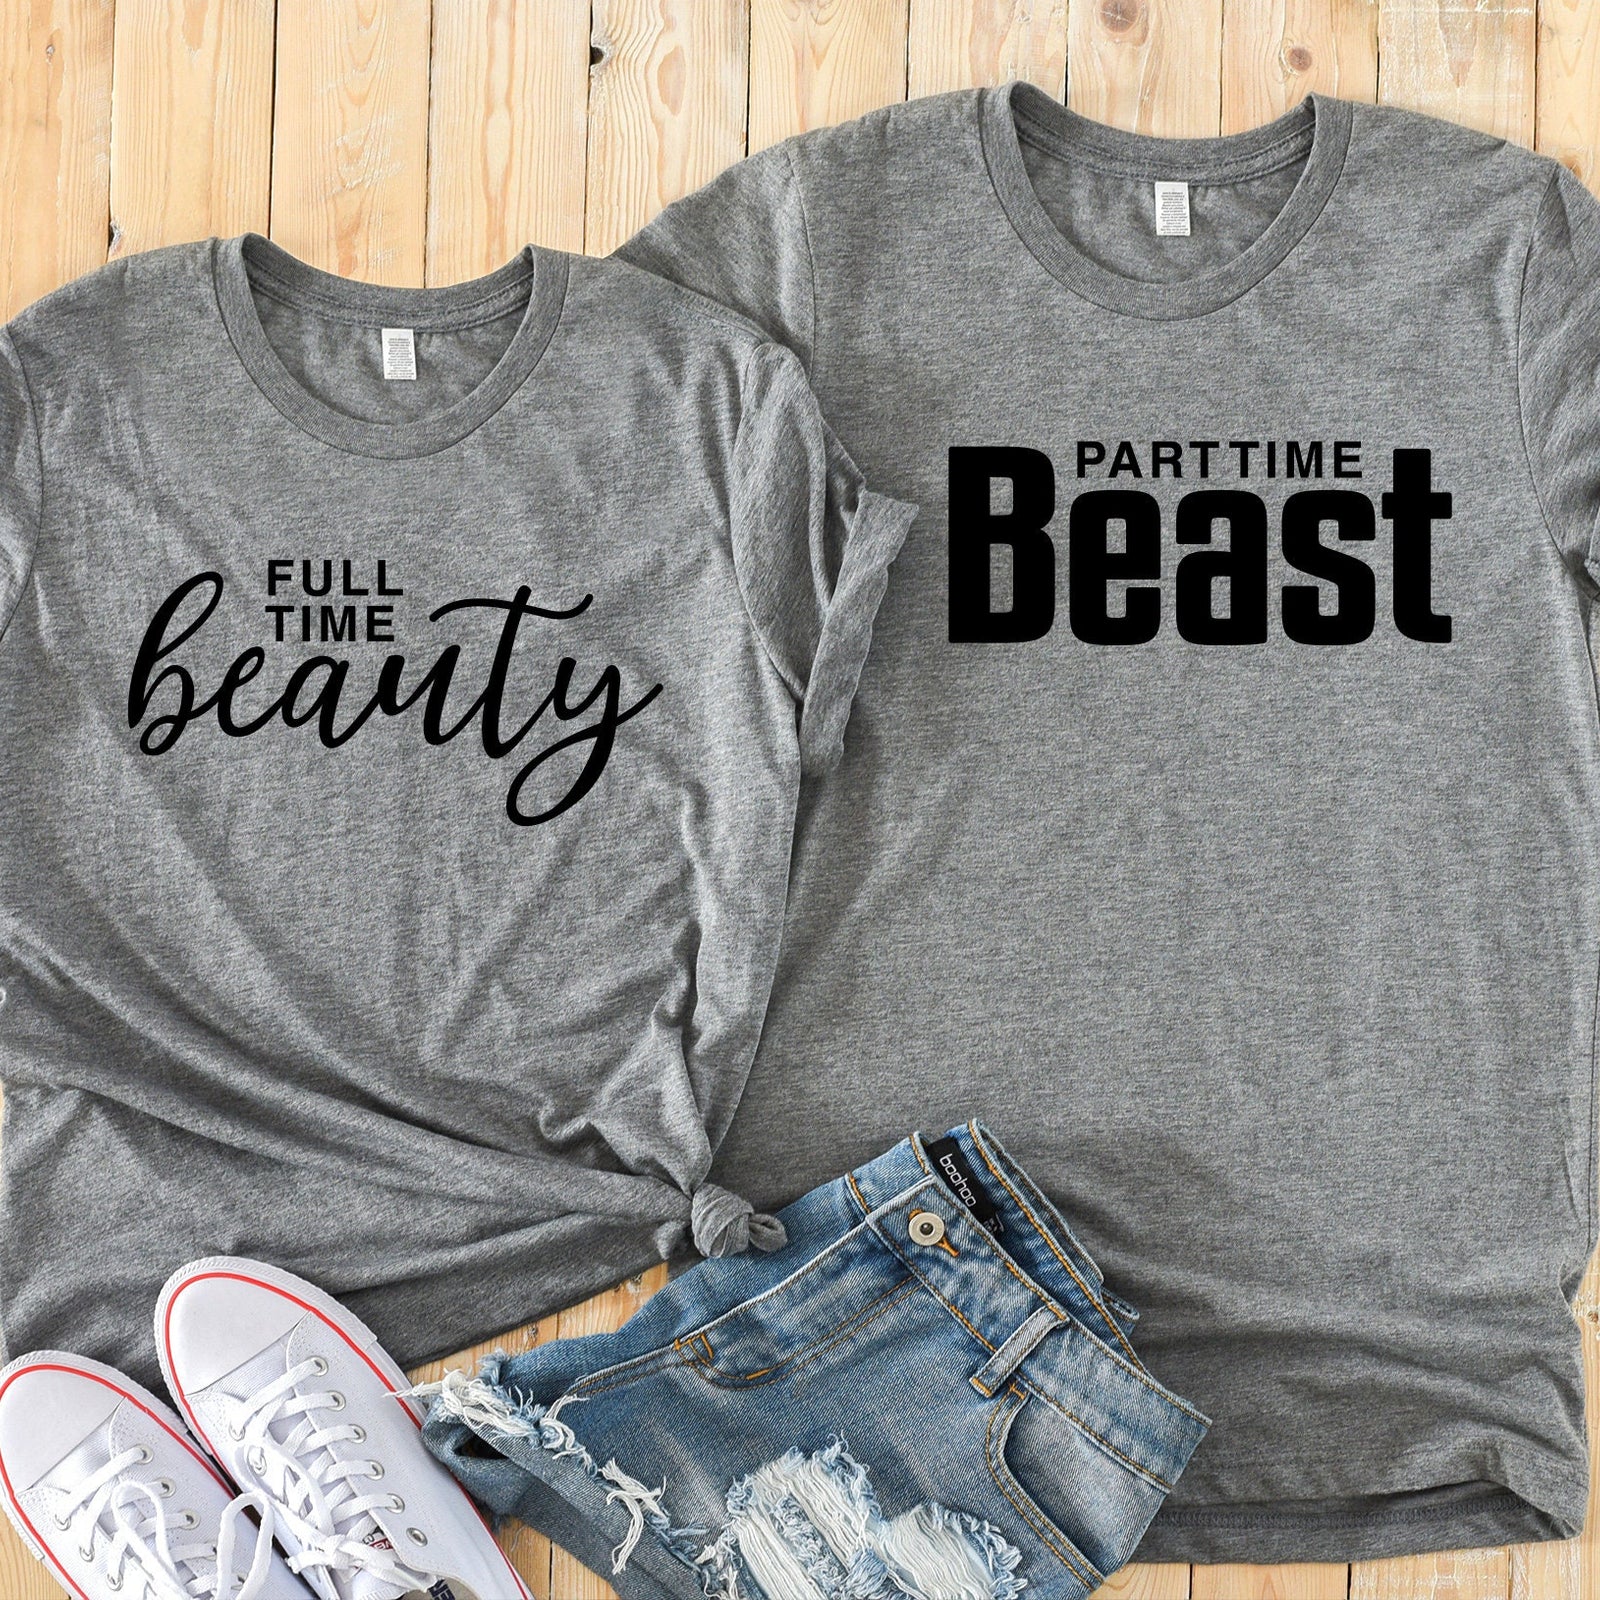 Full Time Beauty and Part Time Beast Shirts - Disney Couples - Matching Shirts